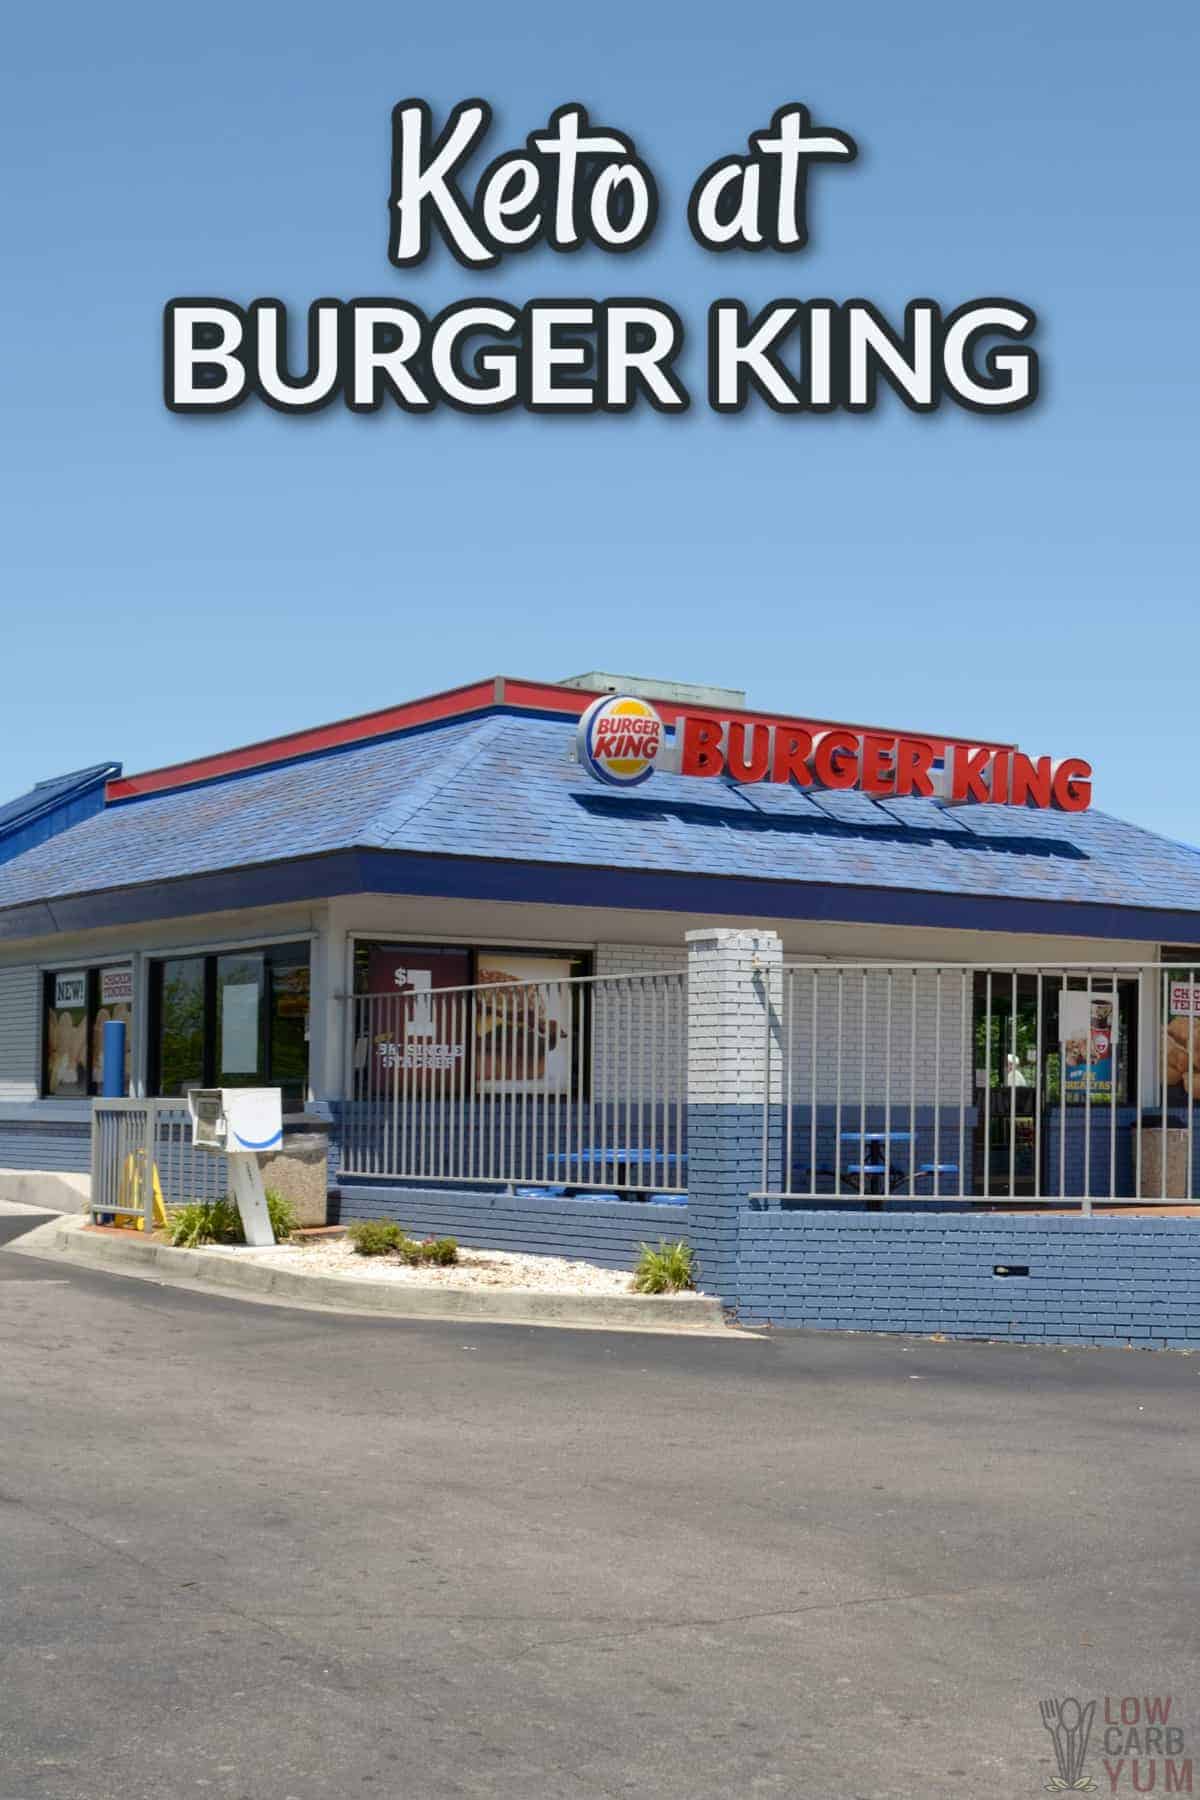 restaurant image with keto at burger king text overlay.